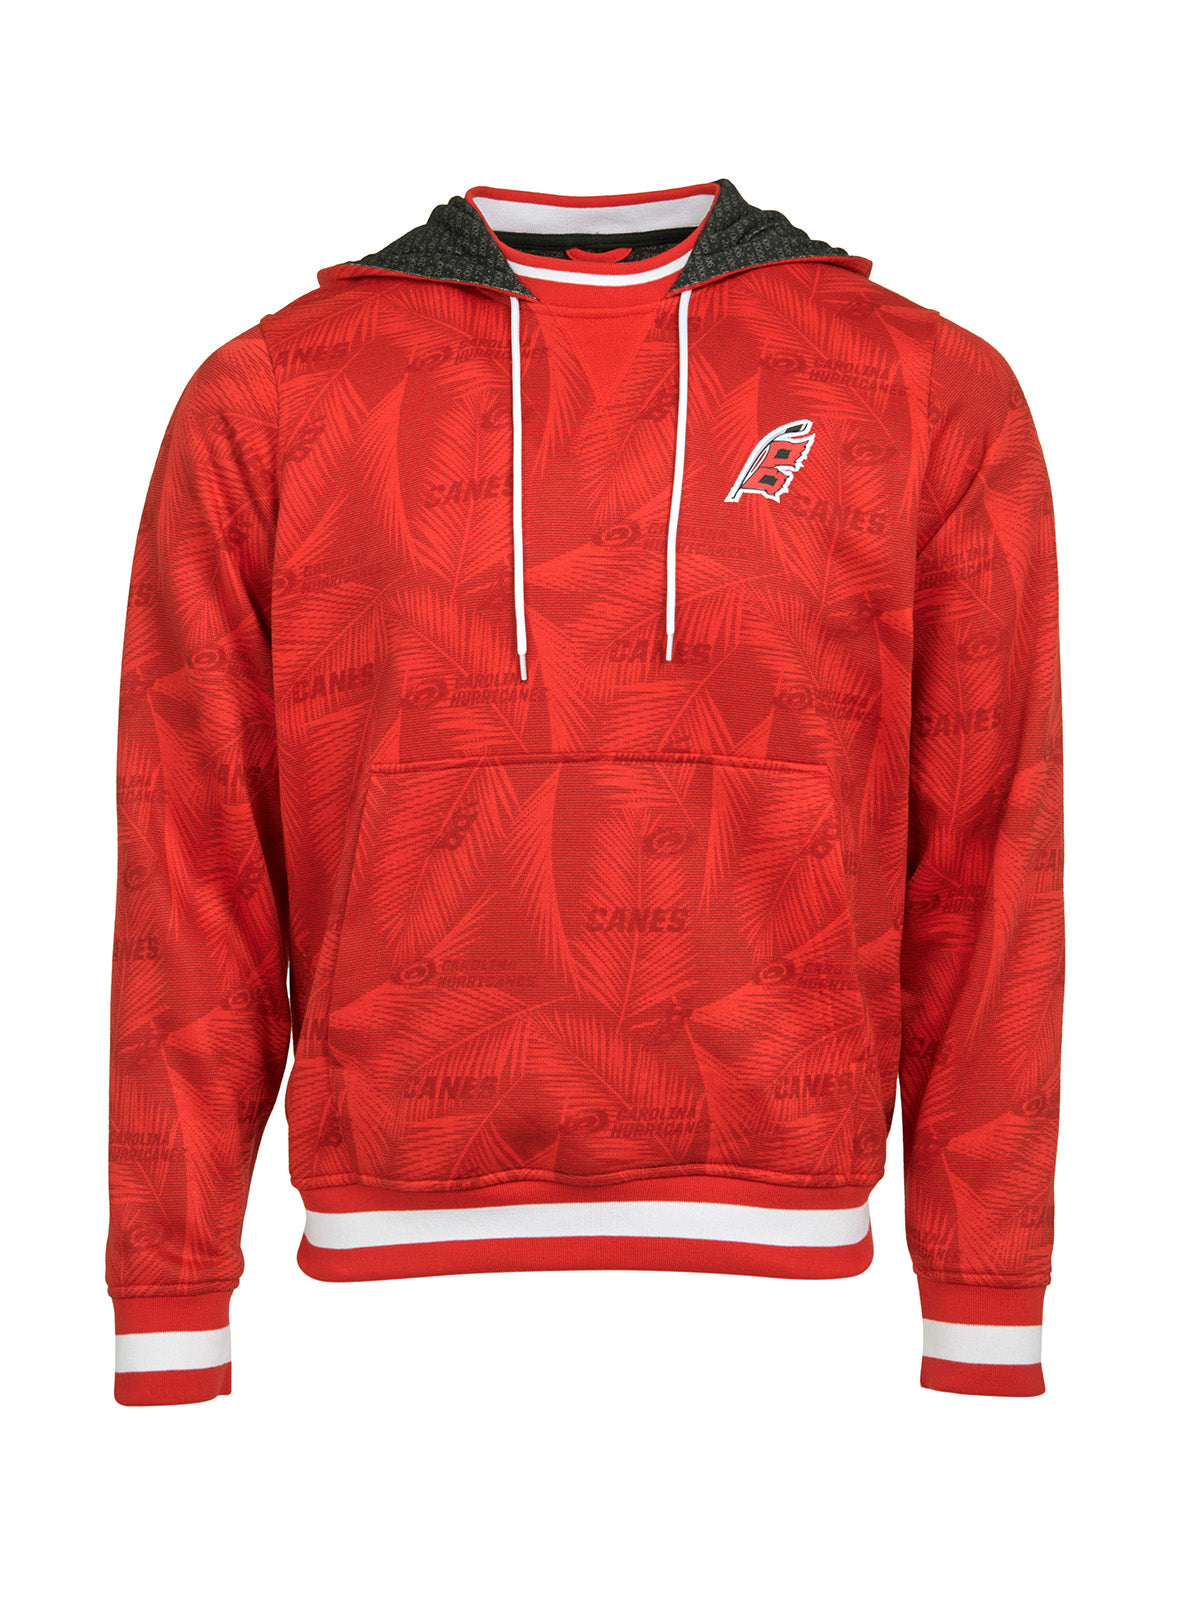 Carolina Hurricanes Hoodie - Show your team spirit, with the iconic team logo patch on the front left chest, and proudly display your Carolina Hurricanes support in their team colors with this NHL hockey hoodie.